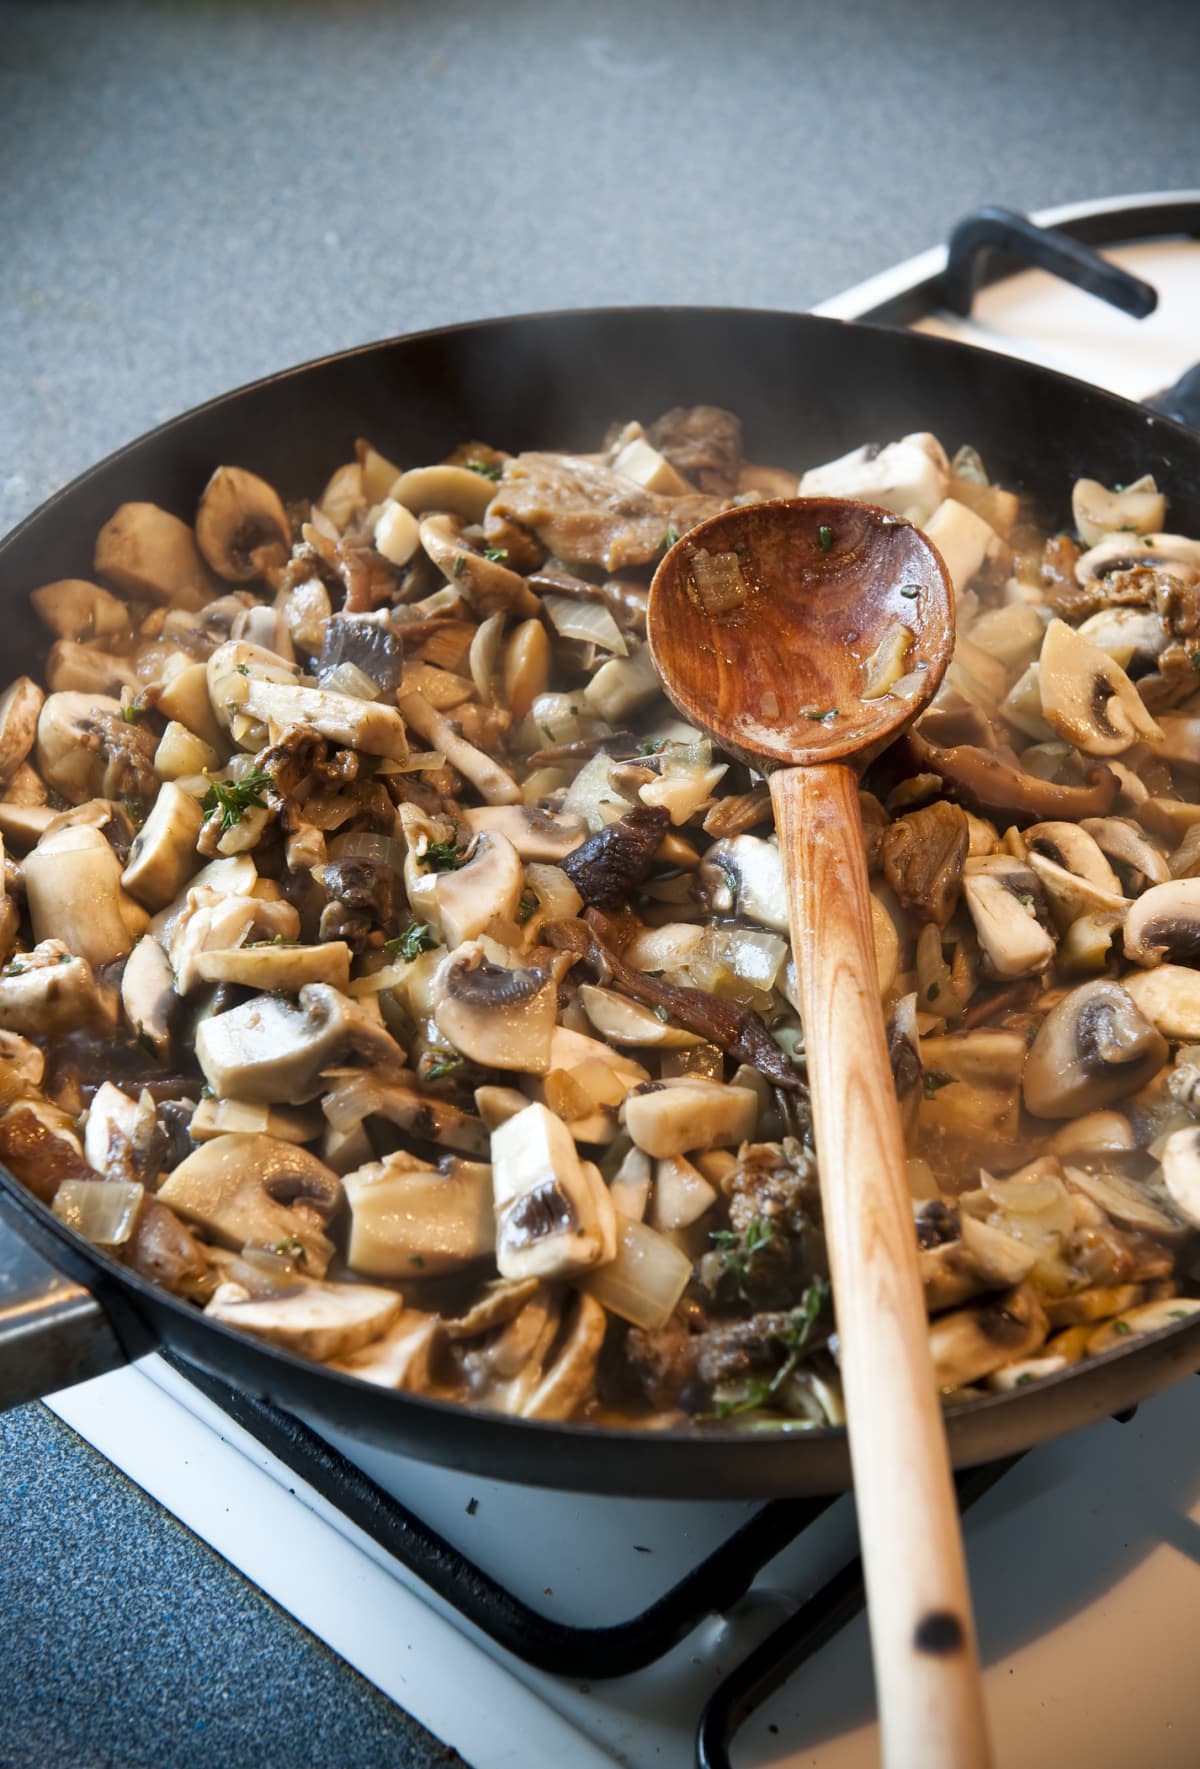 Mushrooms cooking in frying pan on gas stove. Wooden spoon is seen resting in mushroom sauce.See &#8216;Food and Entertaining&#8217; collection: